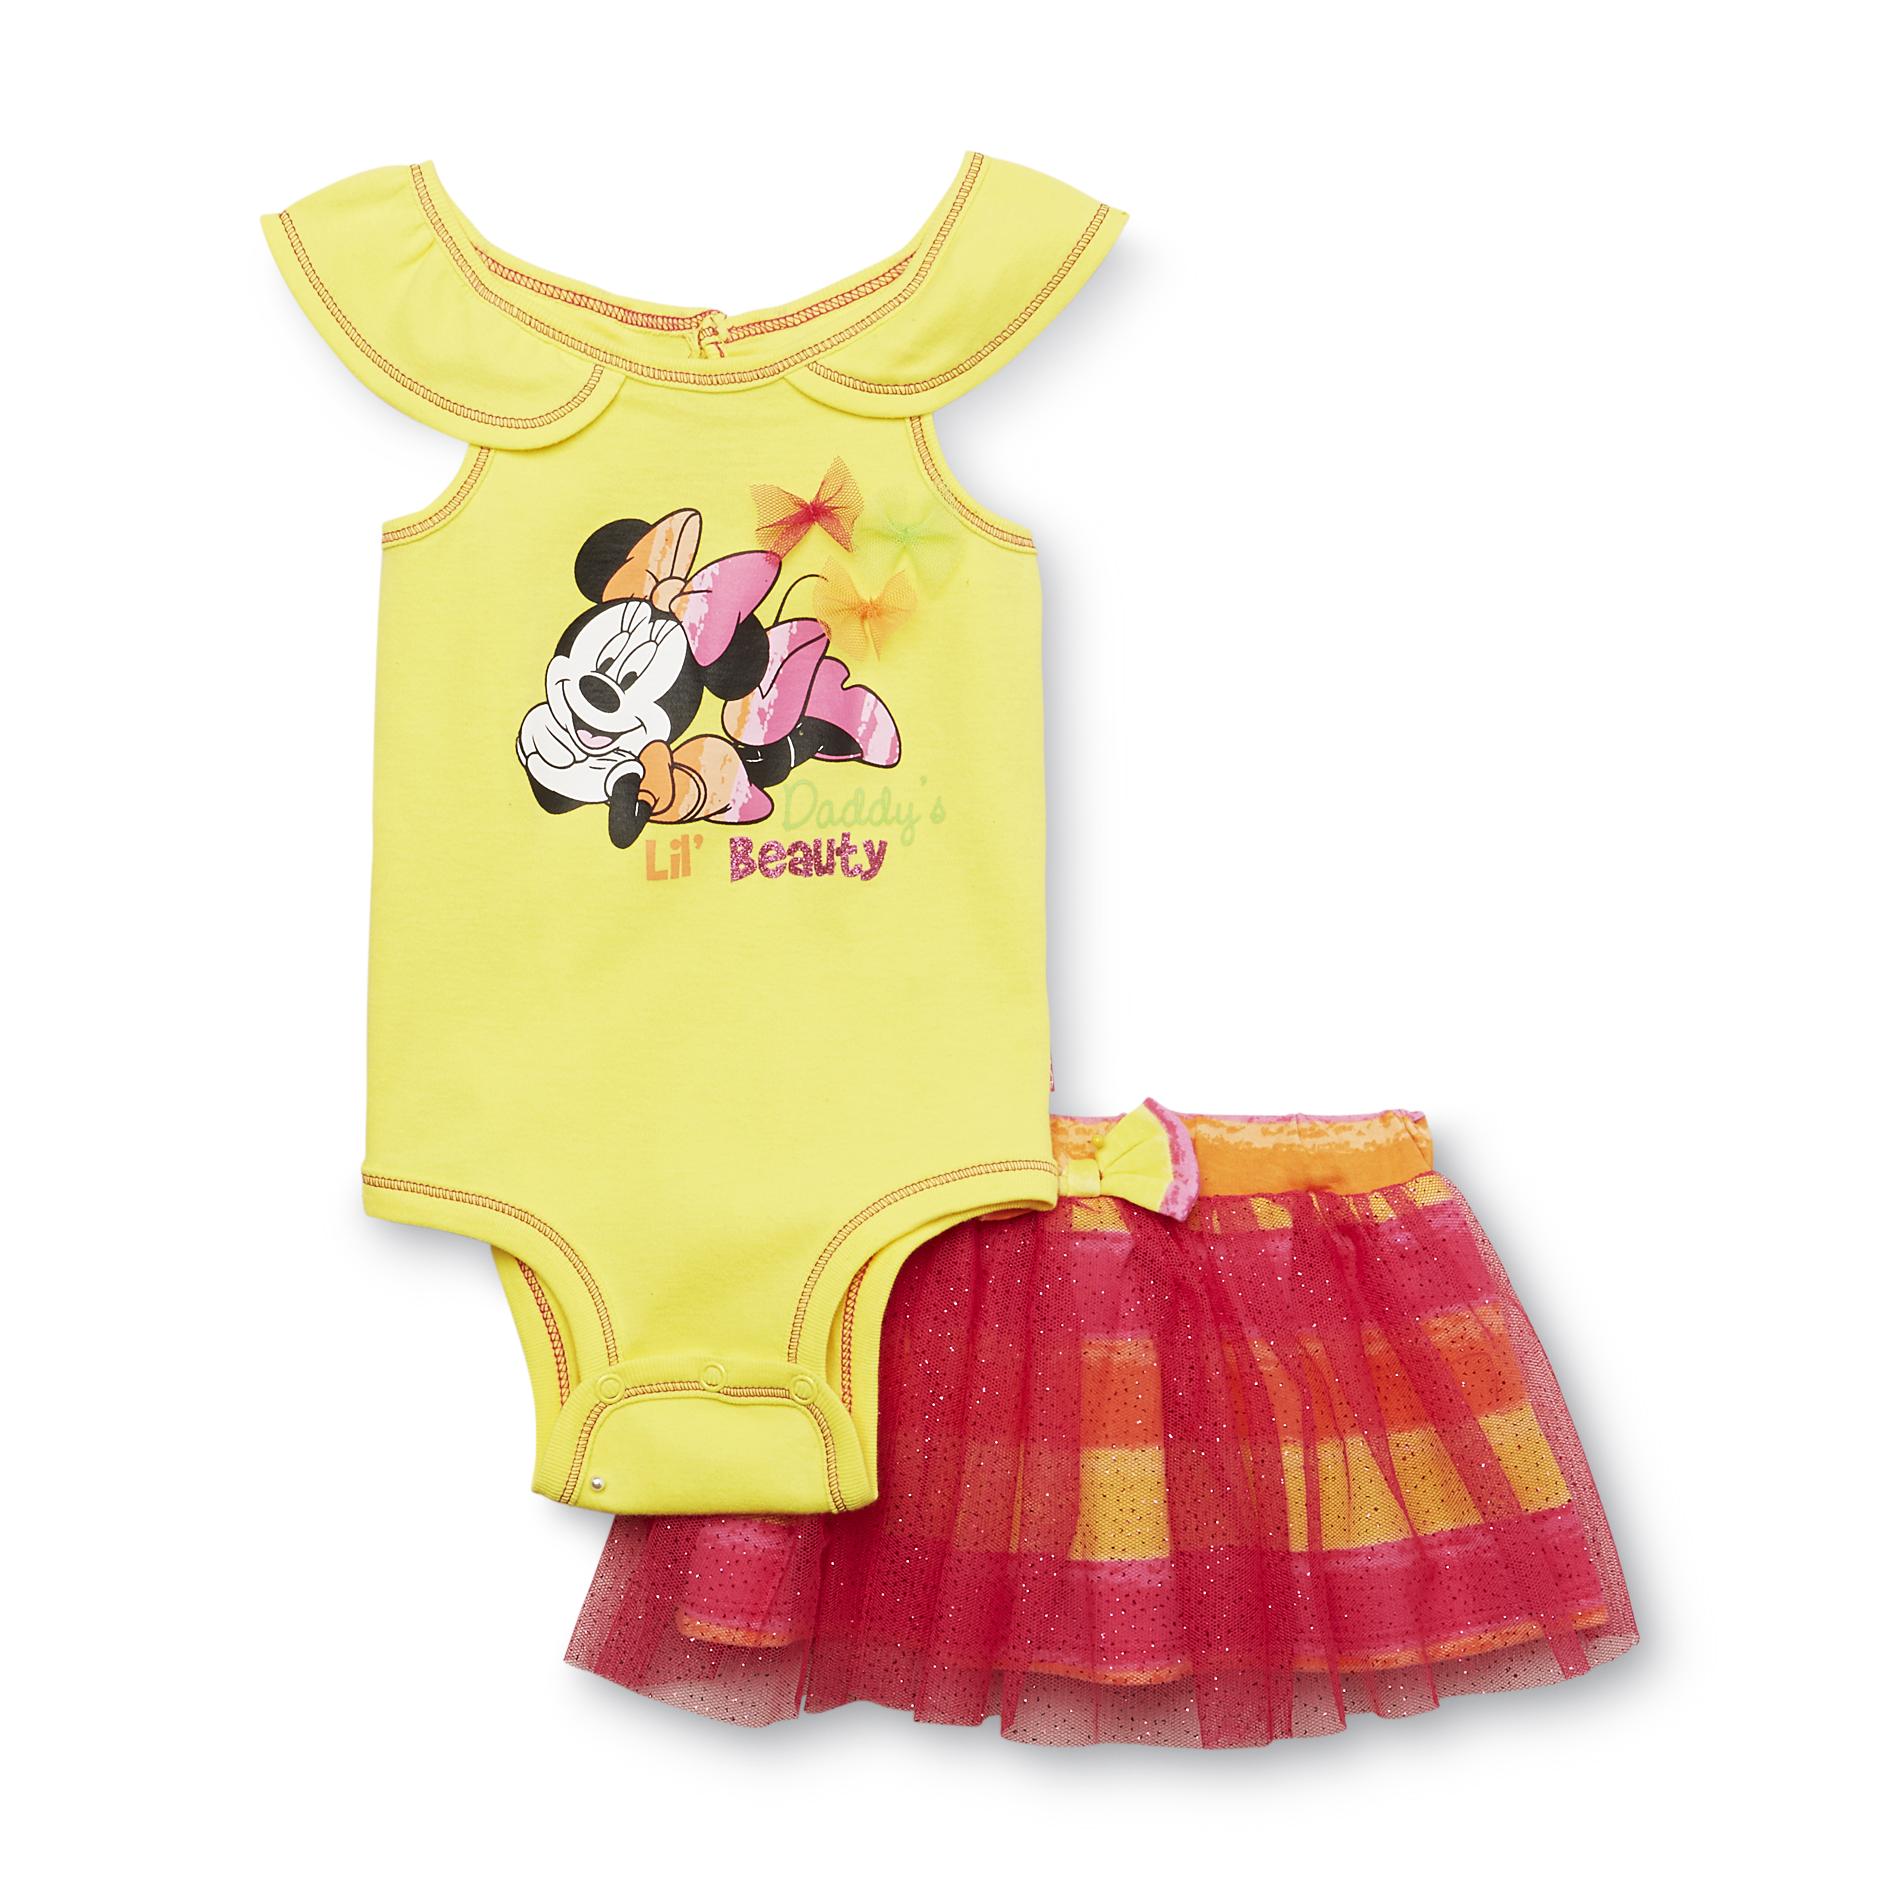 Disney Infant Girl's Bodysuit and Skirt - Minnie Mouse